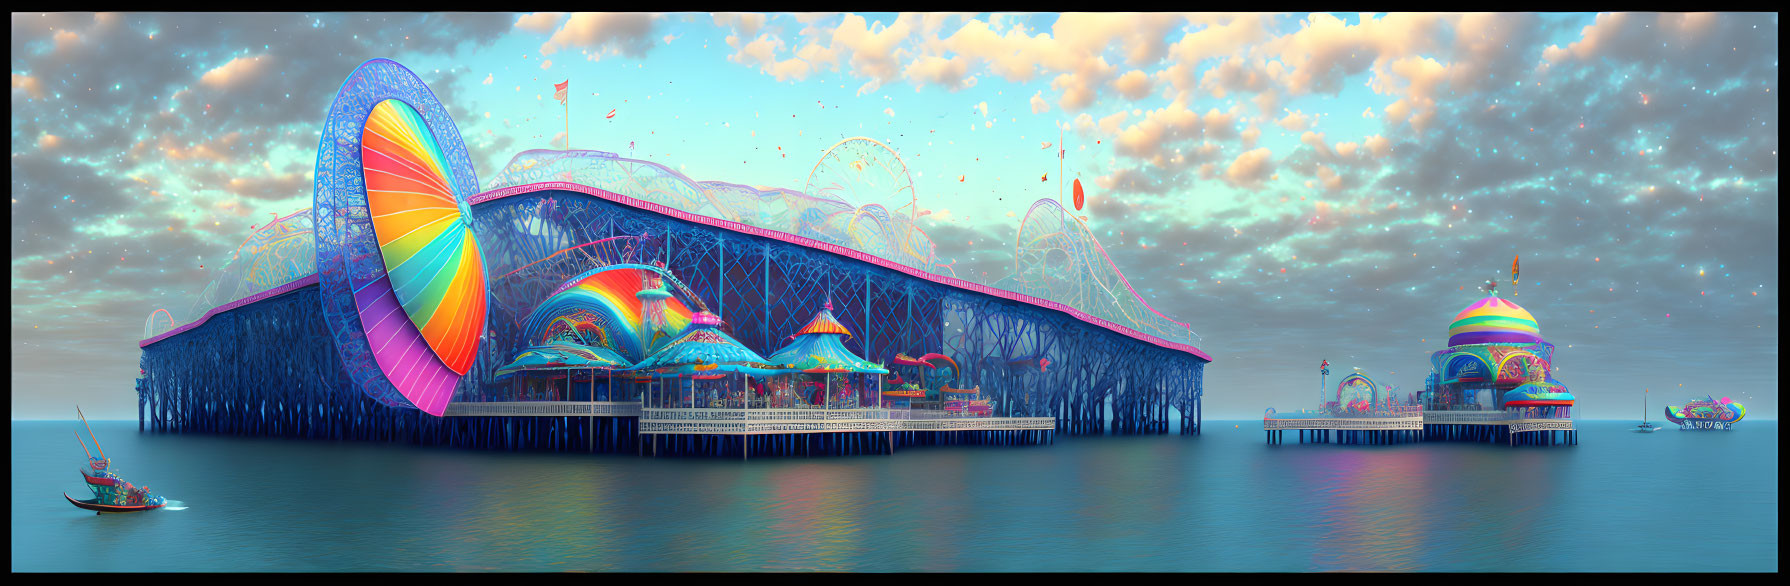 Colorful Amusement Park on Pier with Ferris Wheel & Roller Coasters